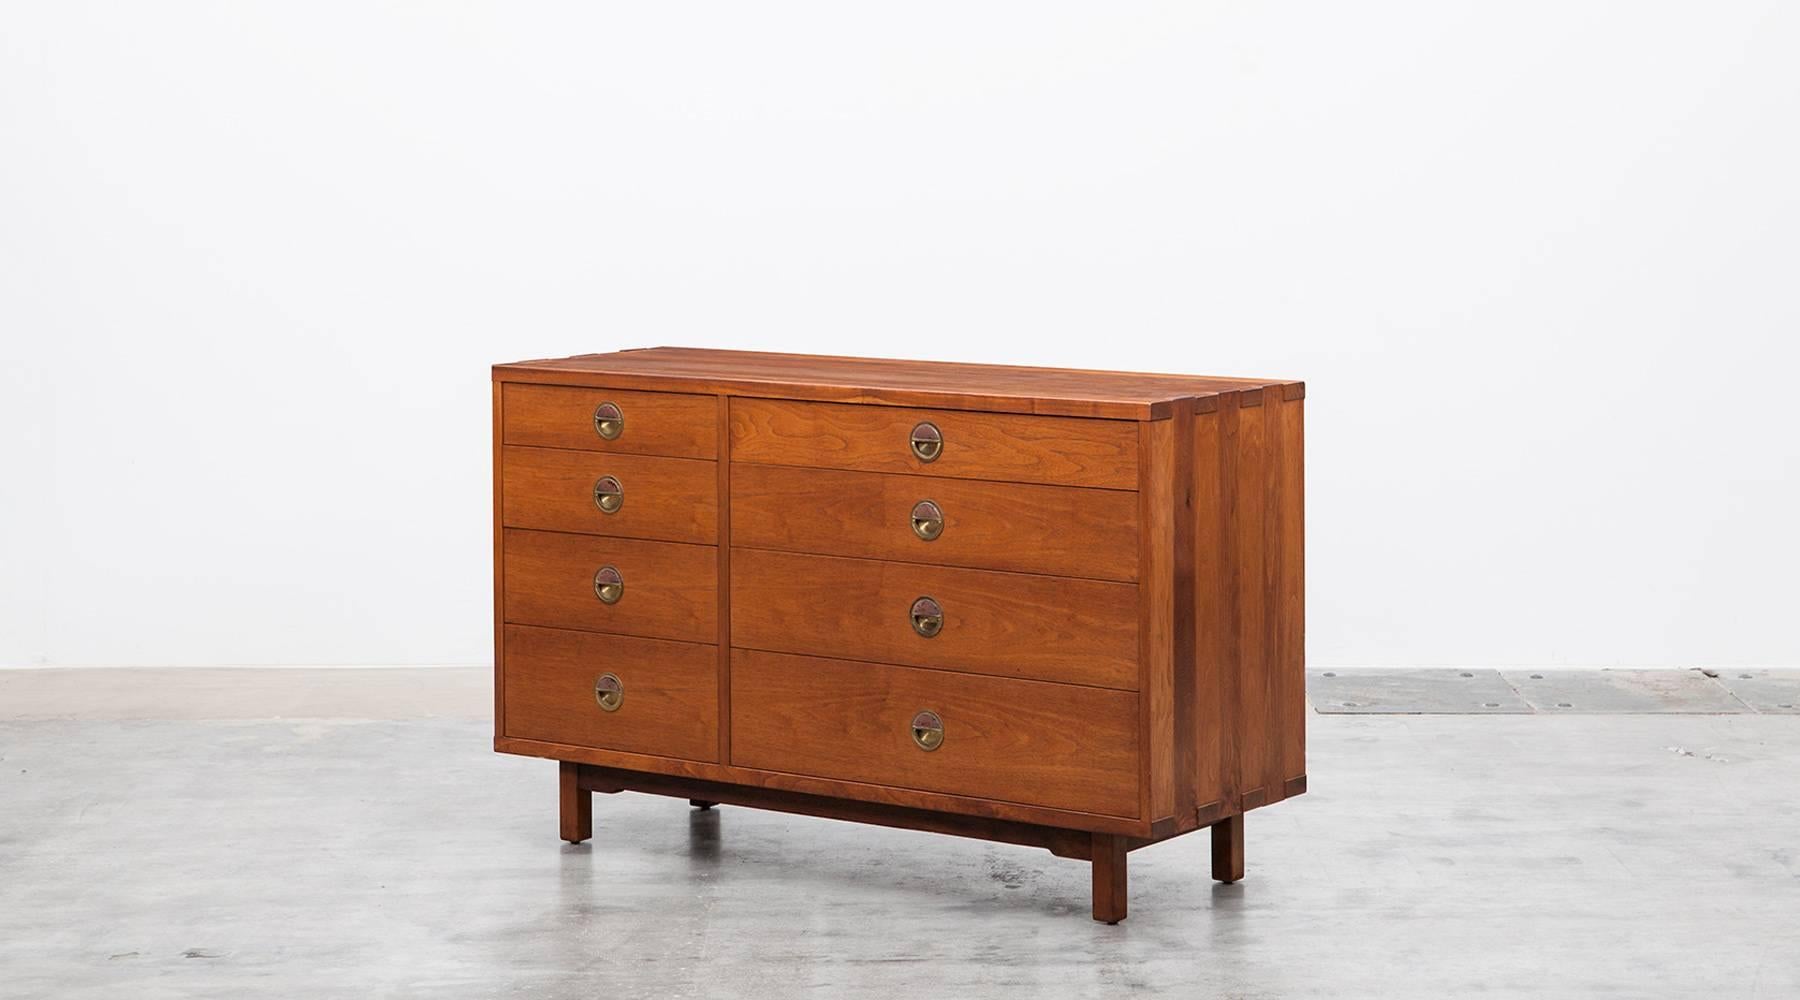 Very rare Edward Wormley Sideboard comes in walnut and a very high quality finish. It contains eight drawers in two different sizes, the grips are made out of brass. Manufacturer's label inside. Manufactured by Dunbar.